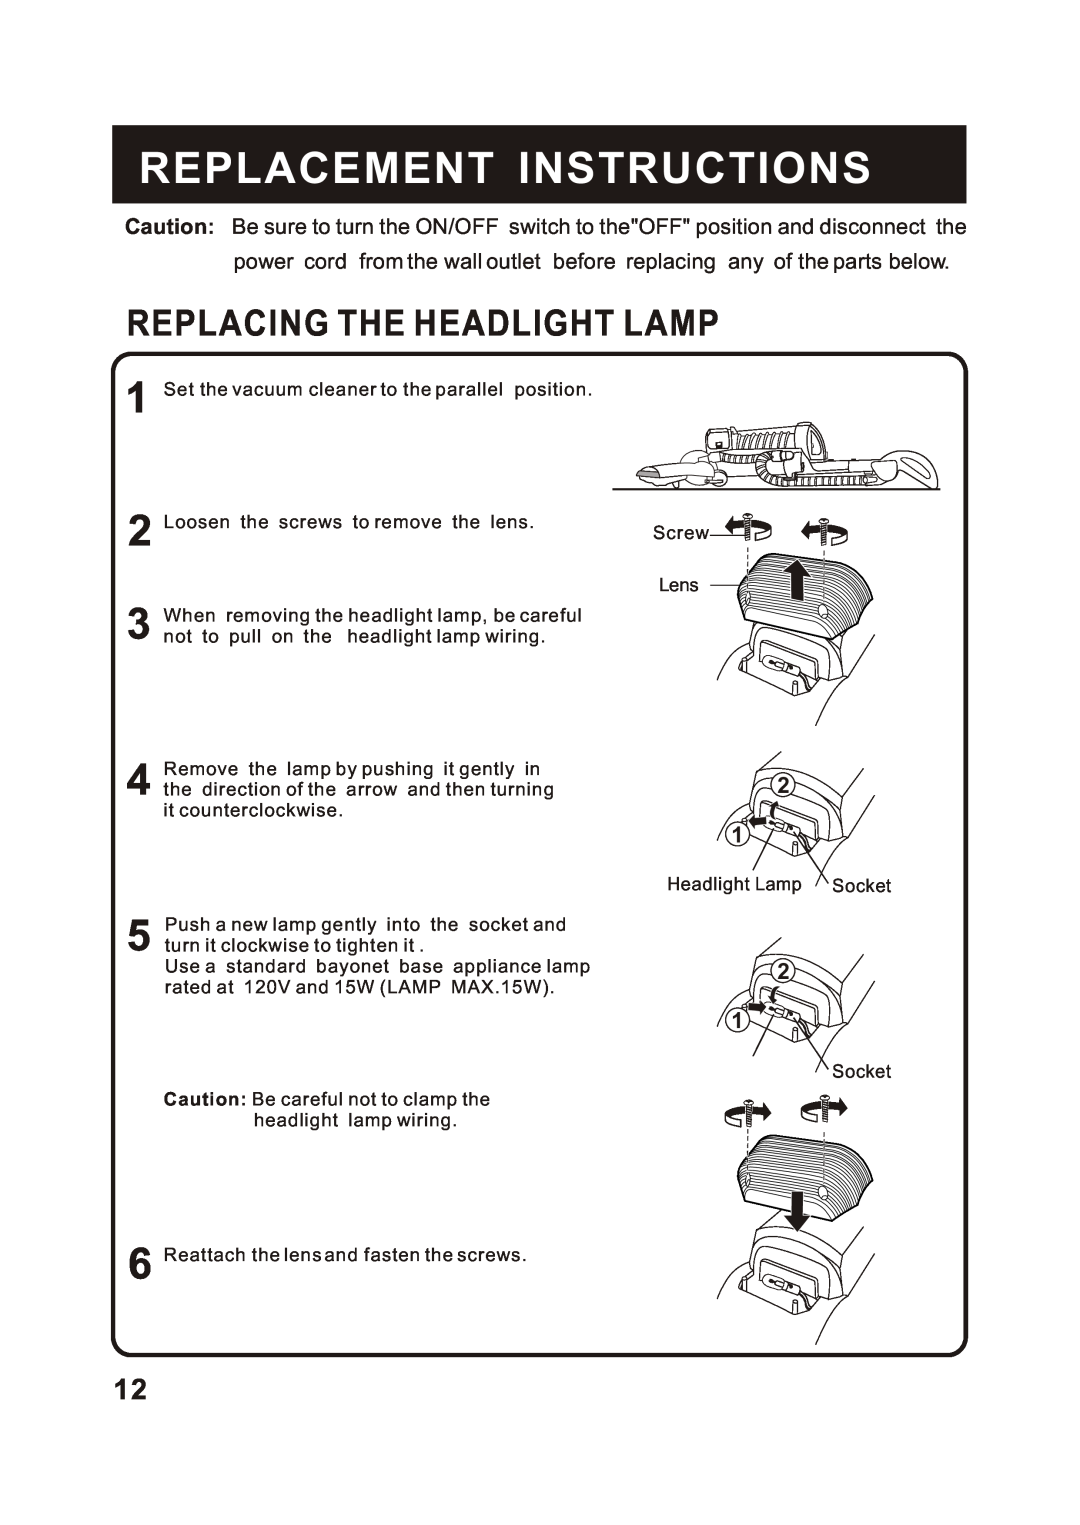 Fantom Vacuum FM742H instruction manual Replacement Instructions, Replacing The Headlight Lamp 